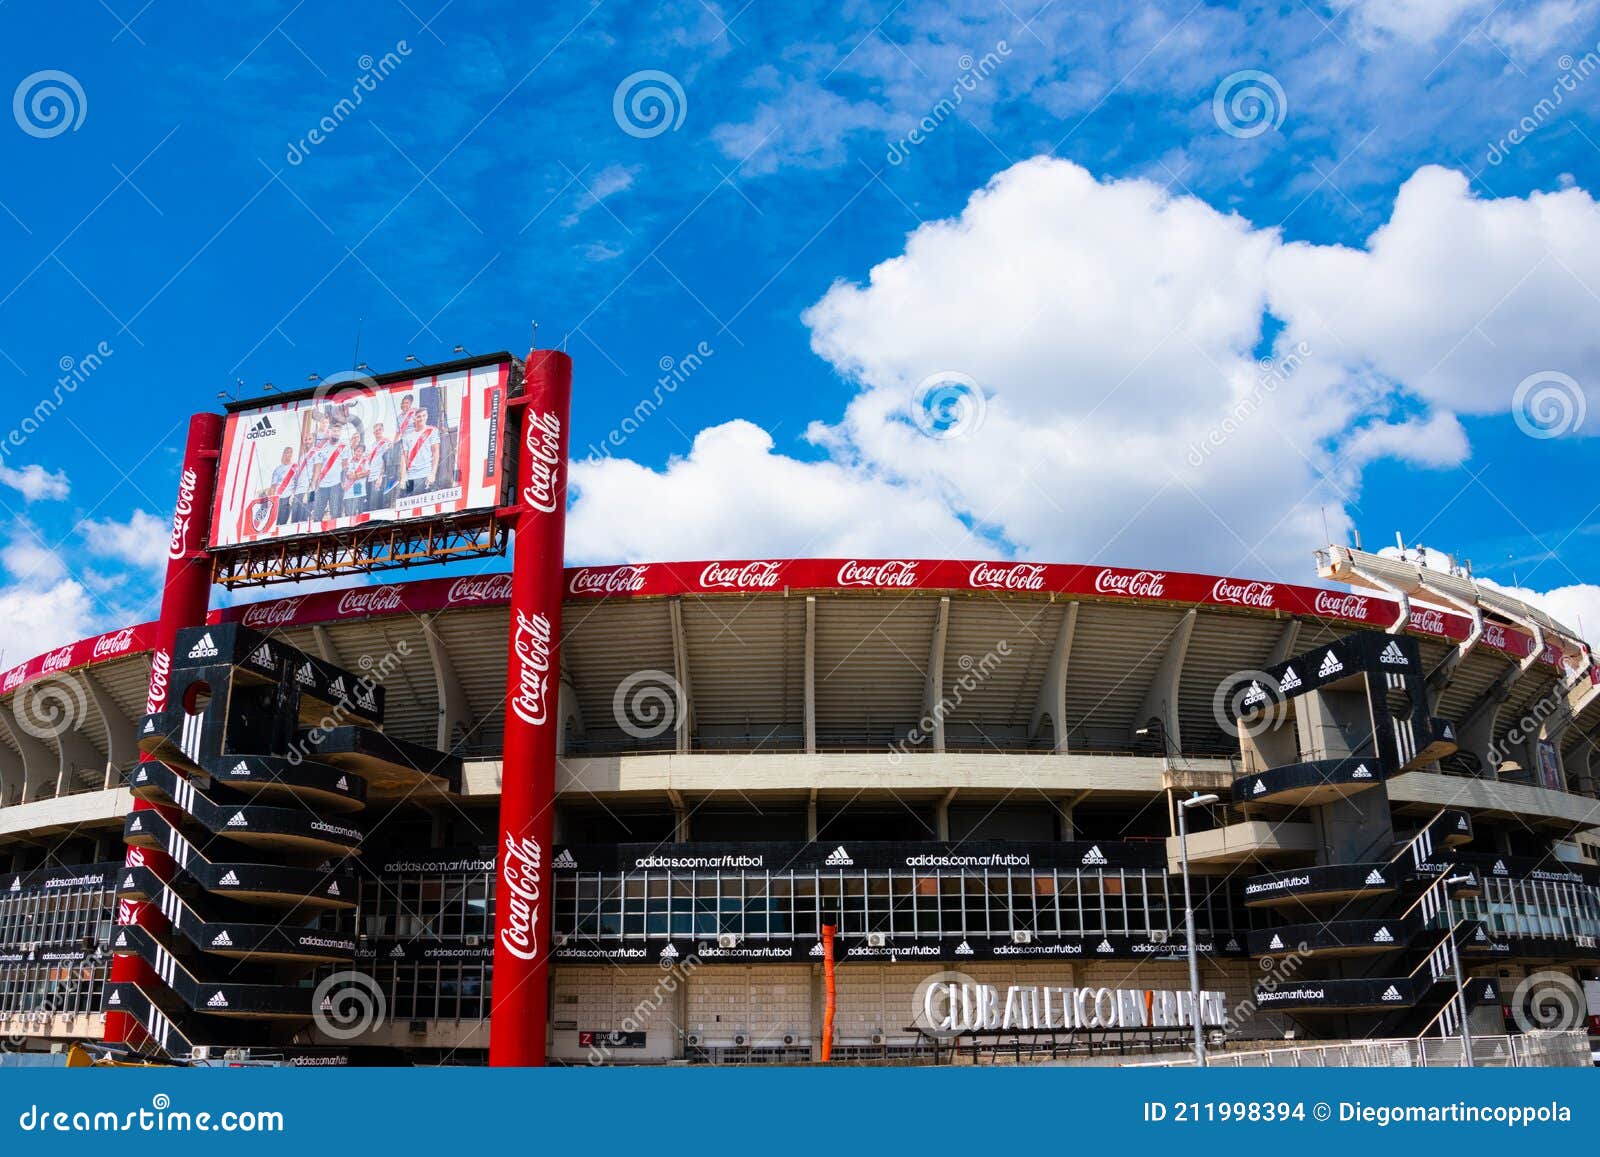 Club Atletico River Plate Stadium Editorial Stock Image - Image of  argentina, river: 211998394